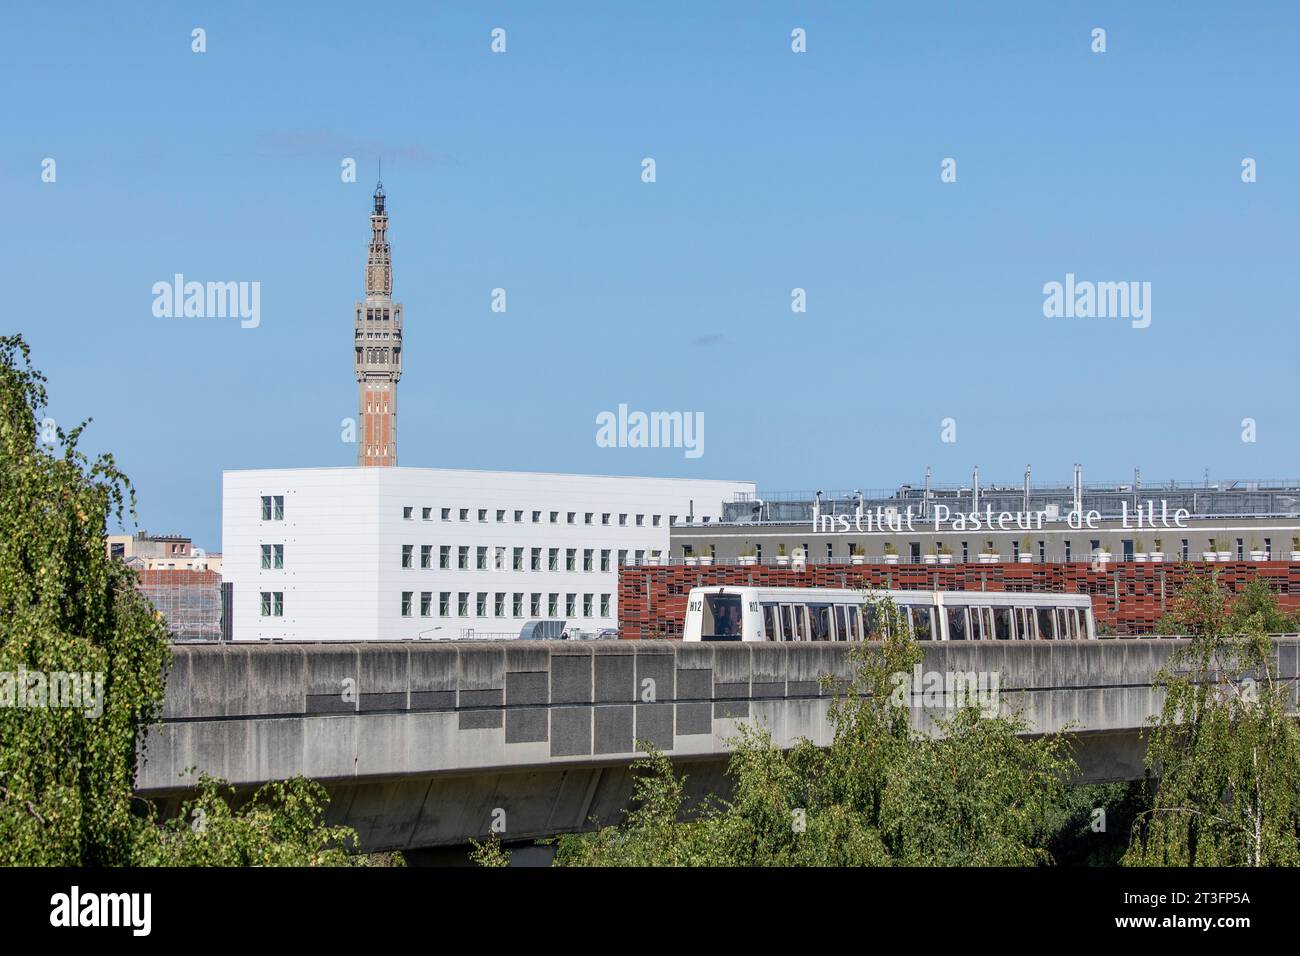 France, Nord, Lille, view of the Pasteur Institute of Lille, the aerial metro and the belfry of the town hall from the Saint-Sauveur wasteland Stock Photo